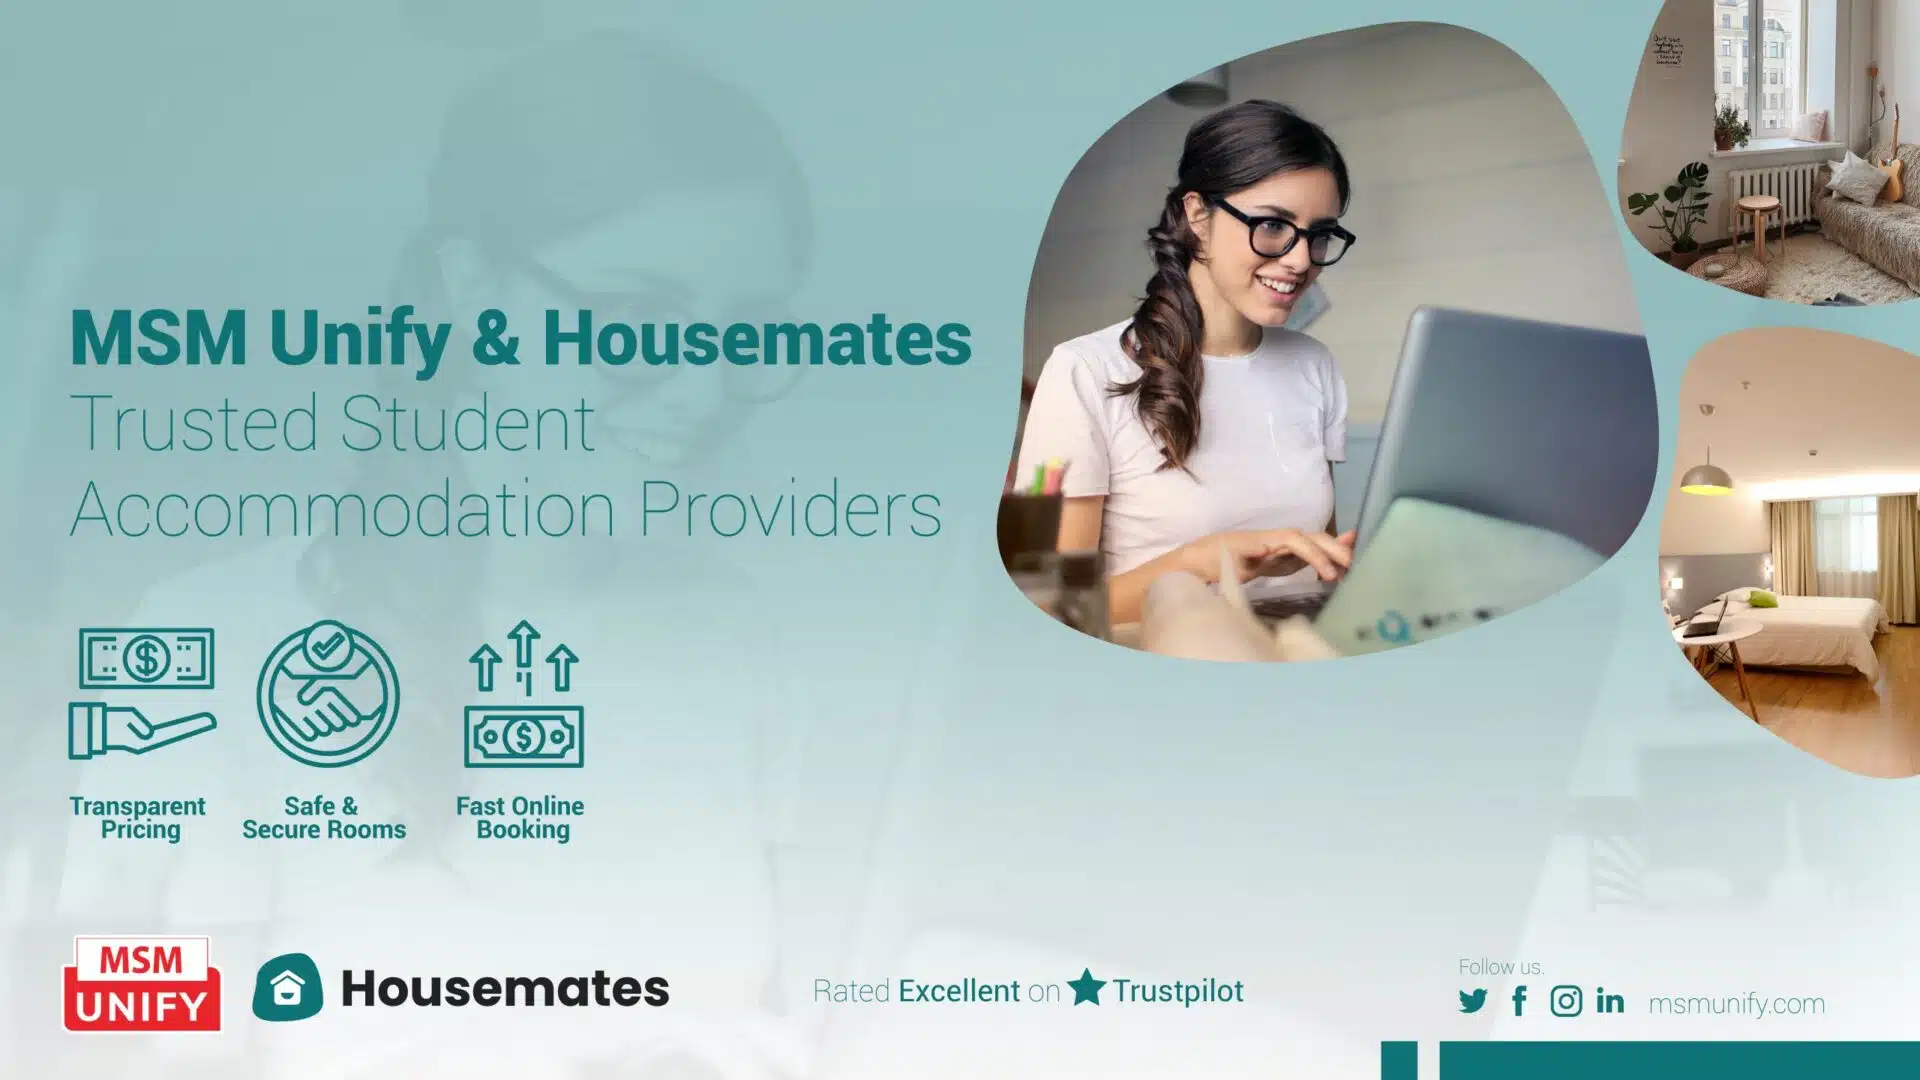 MSM Unify and Housemates Partnership Offers Quick Secure and Affordable Student Accommodations in the UK scaled 1